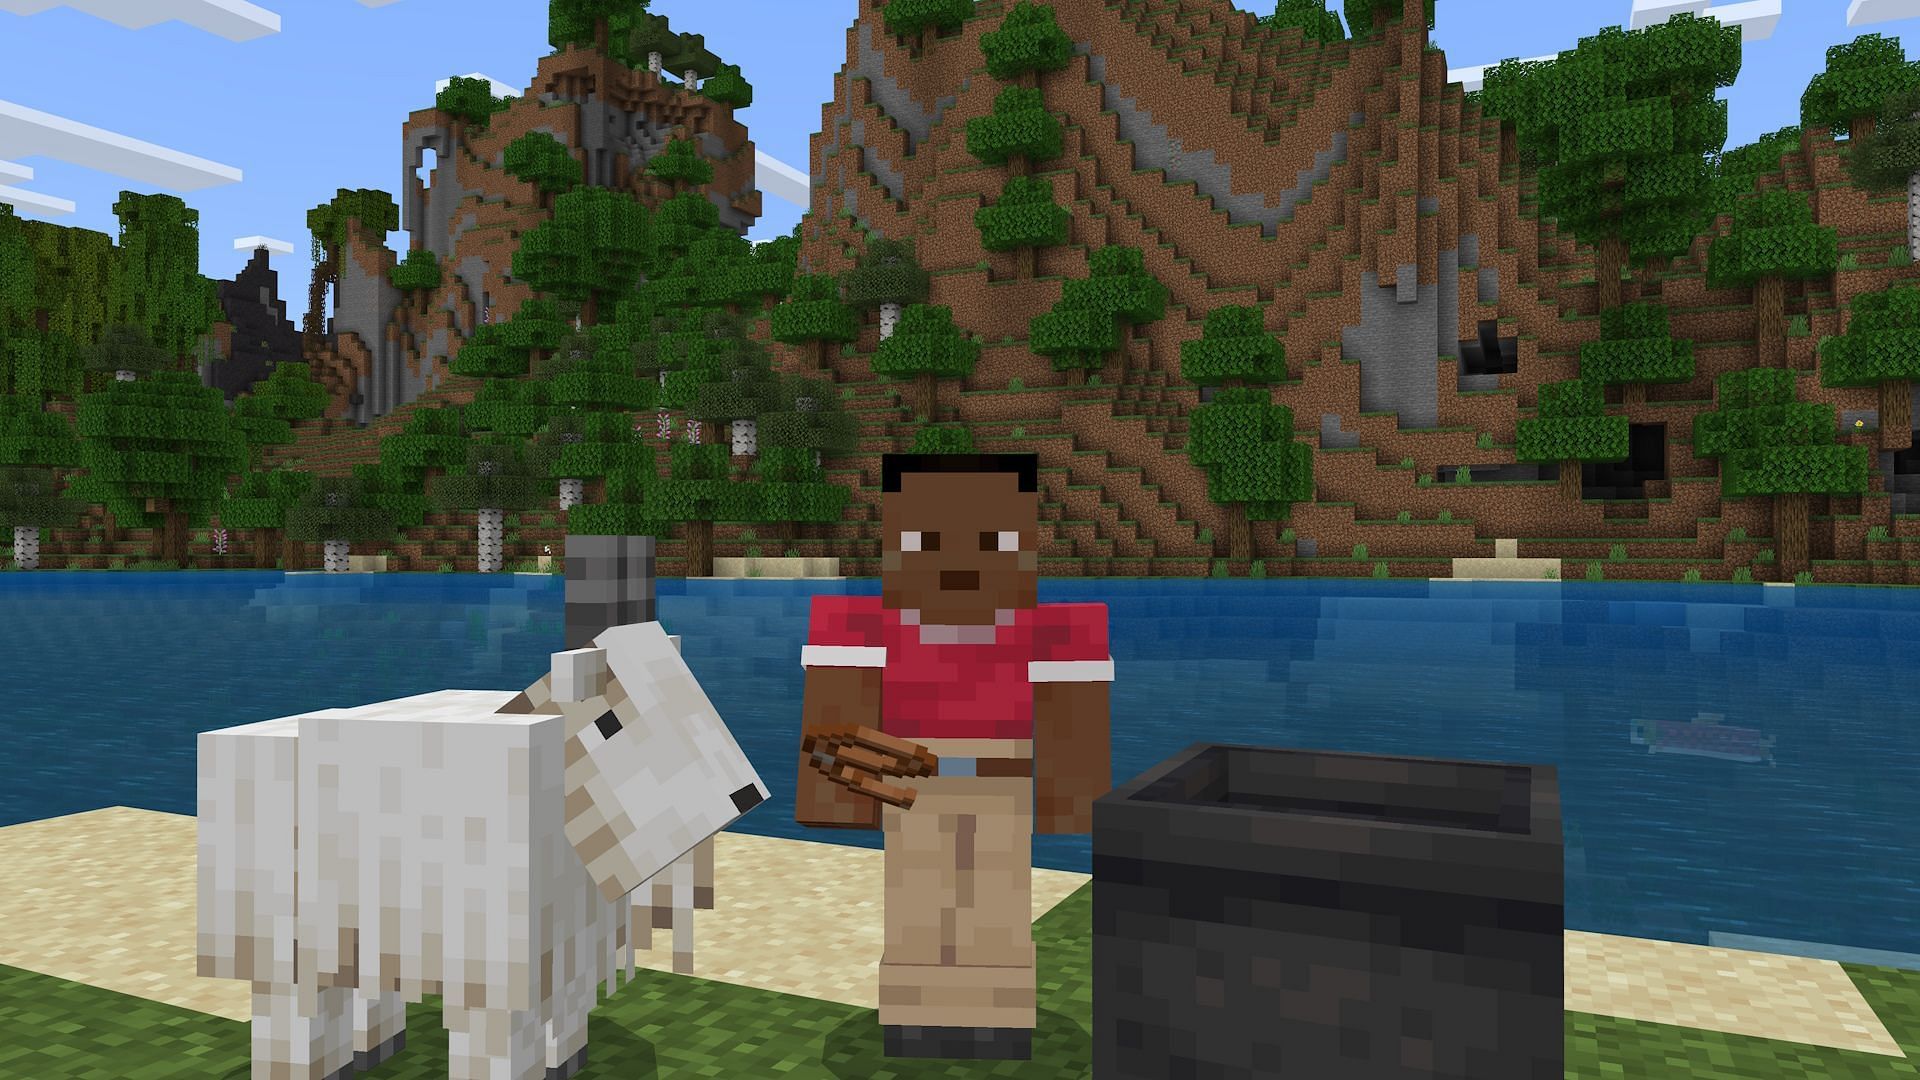 A player stands in front of a goat and a cauldron in Minecraft.